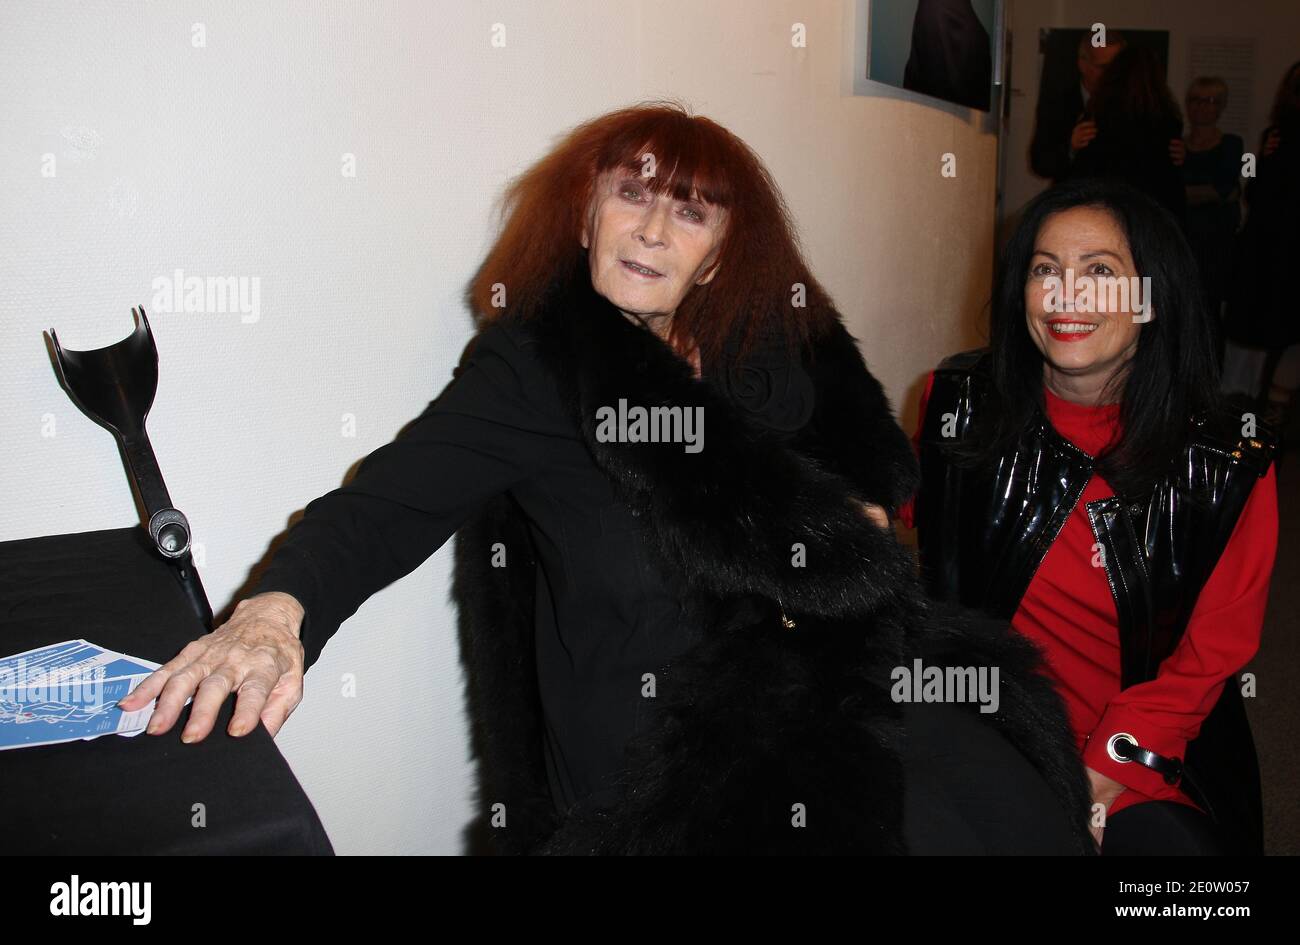 French designer Sonia Rykiel and Sylvana Lorenz attending the opening of  the exhibition 'C France, l'Esprit Français Partout dans le Monde' held at  Espace Cardin, in Paris, France on October 30, 2012.